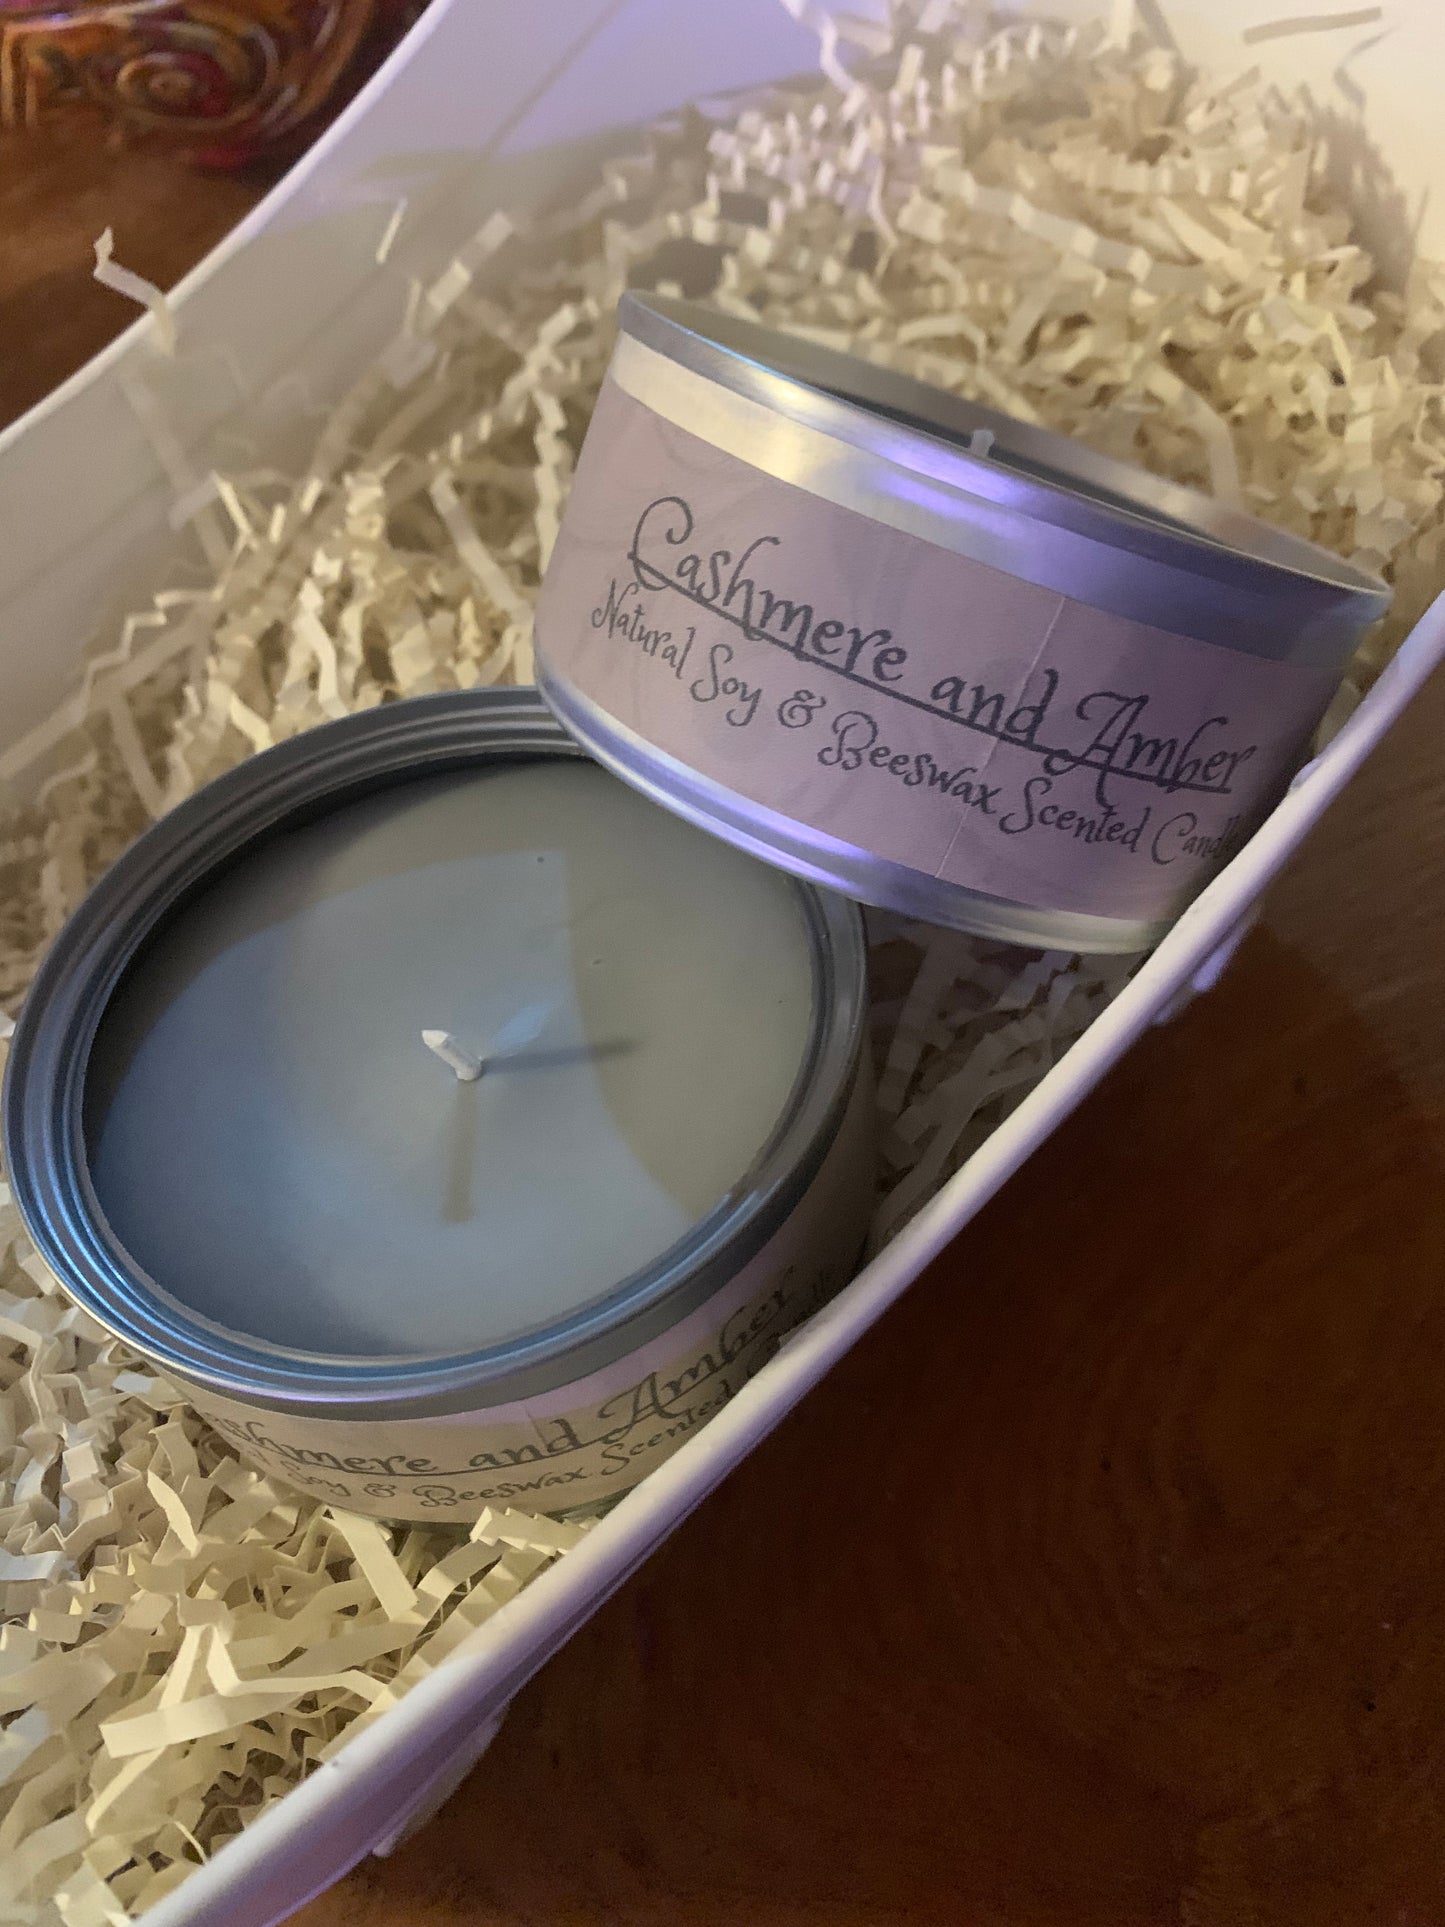 Scented Soy/Beeswax Candles